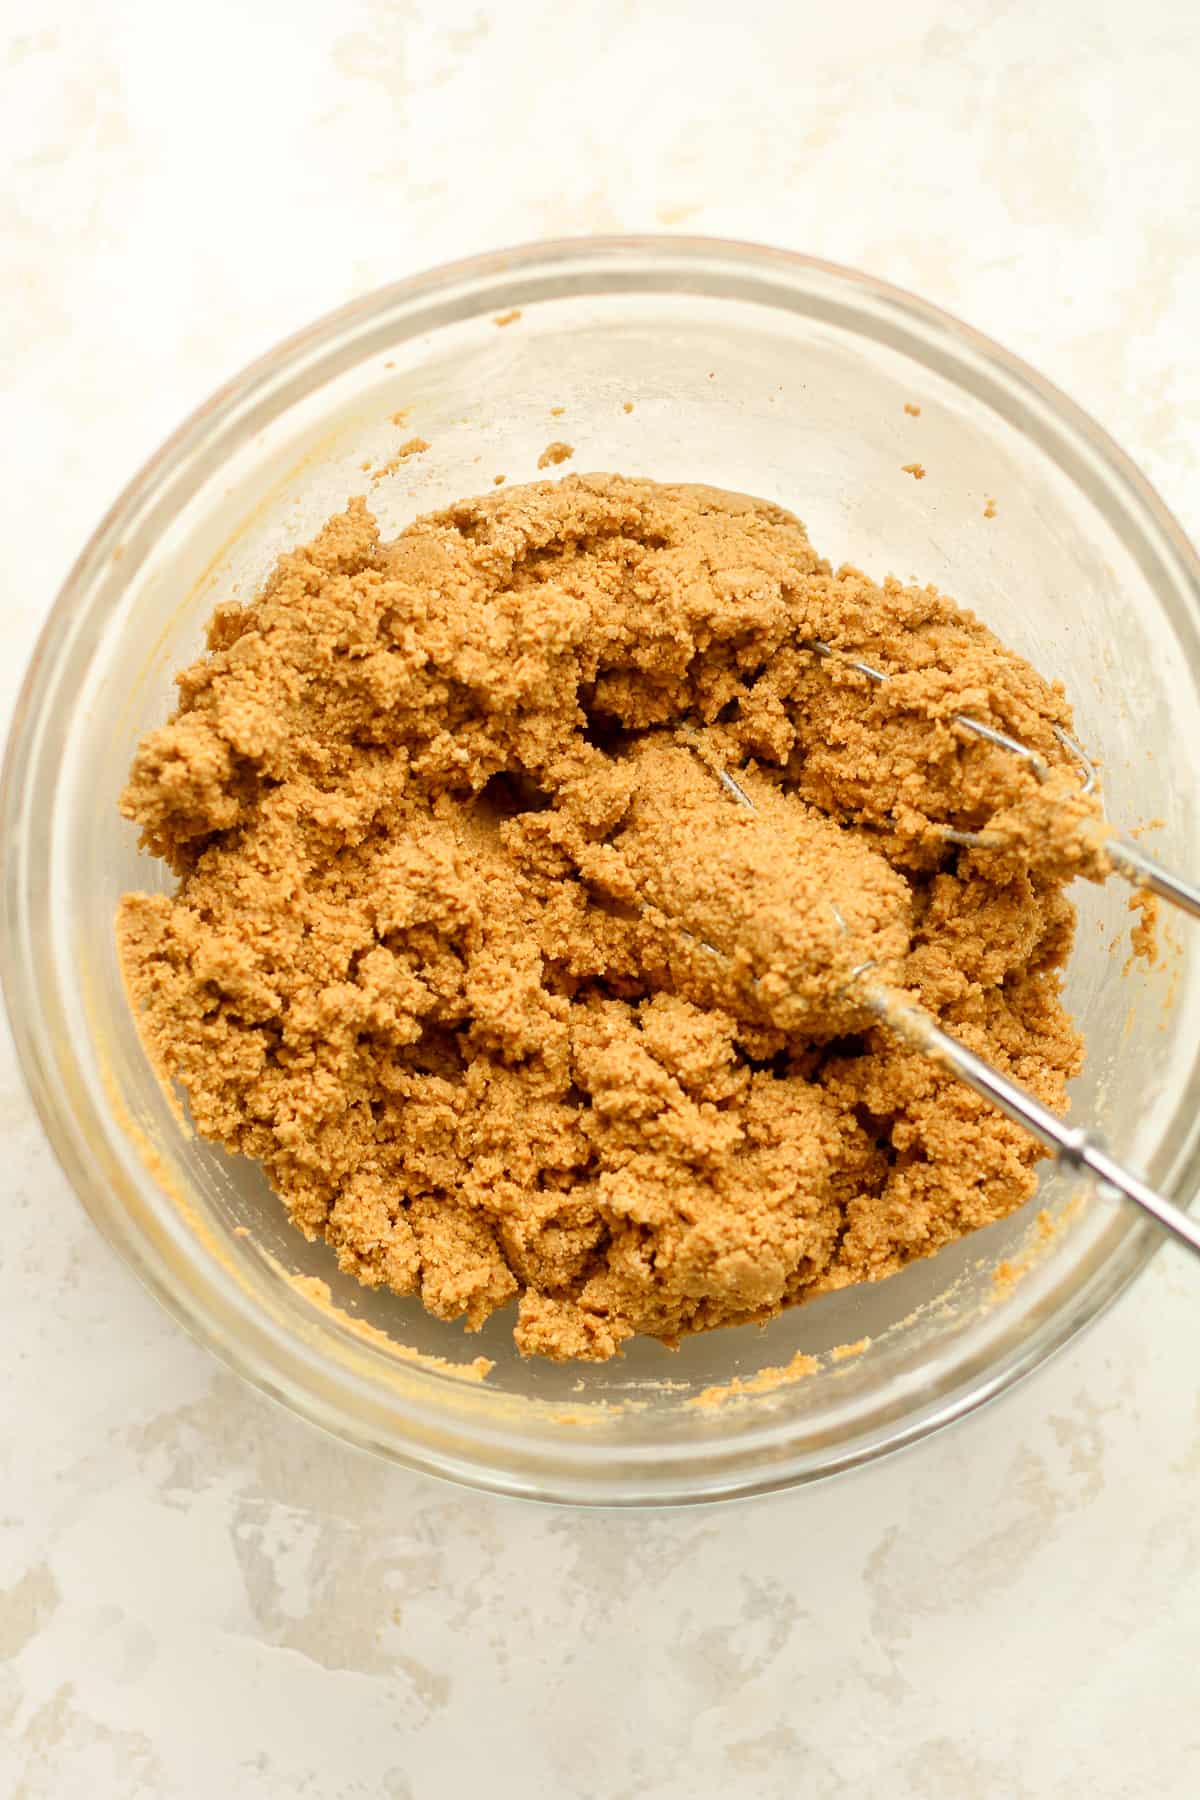 A bowl of the creamy peanut butter mixture.